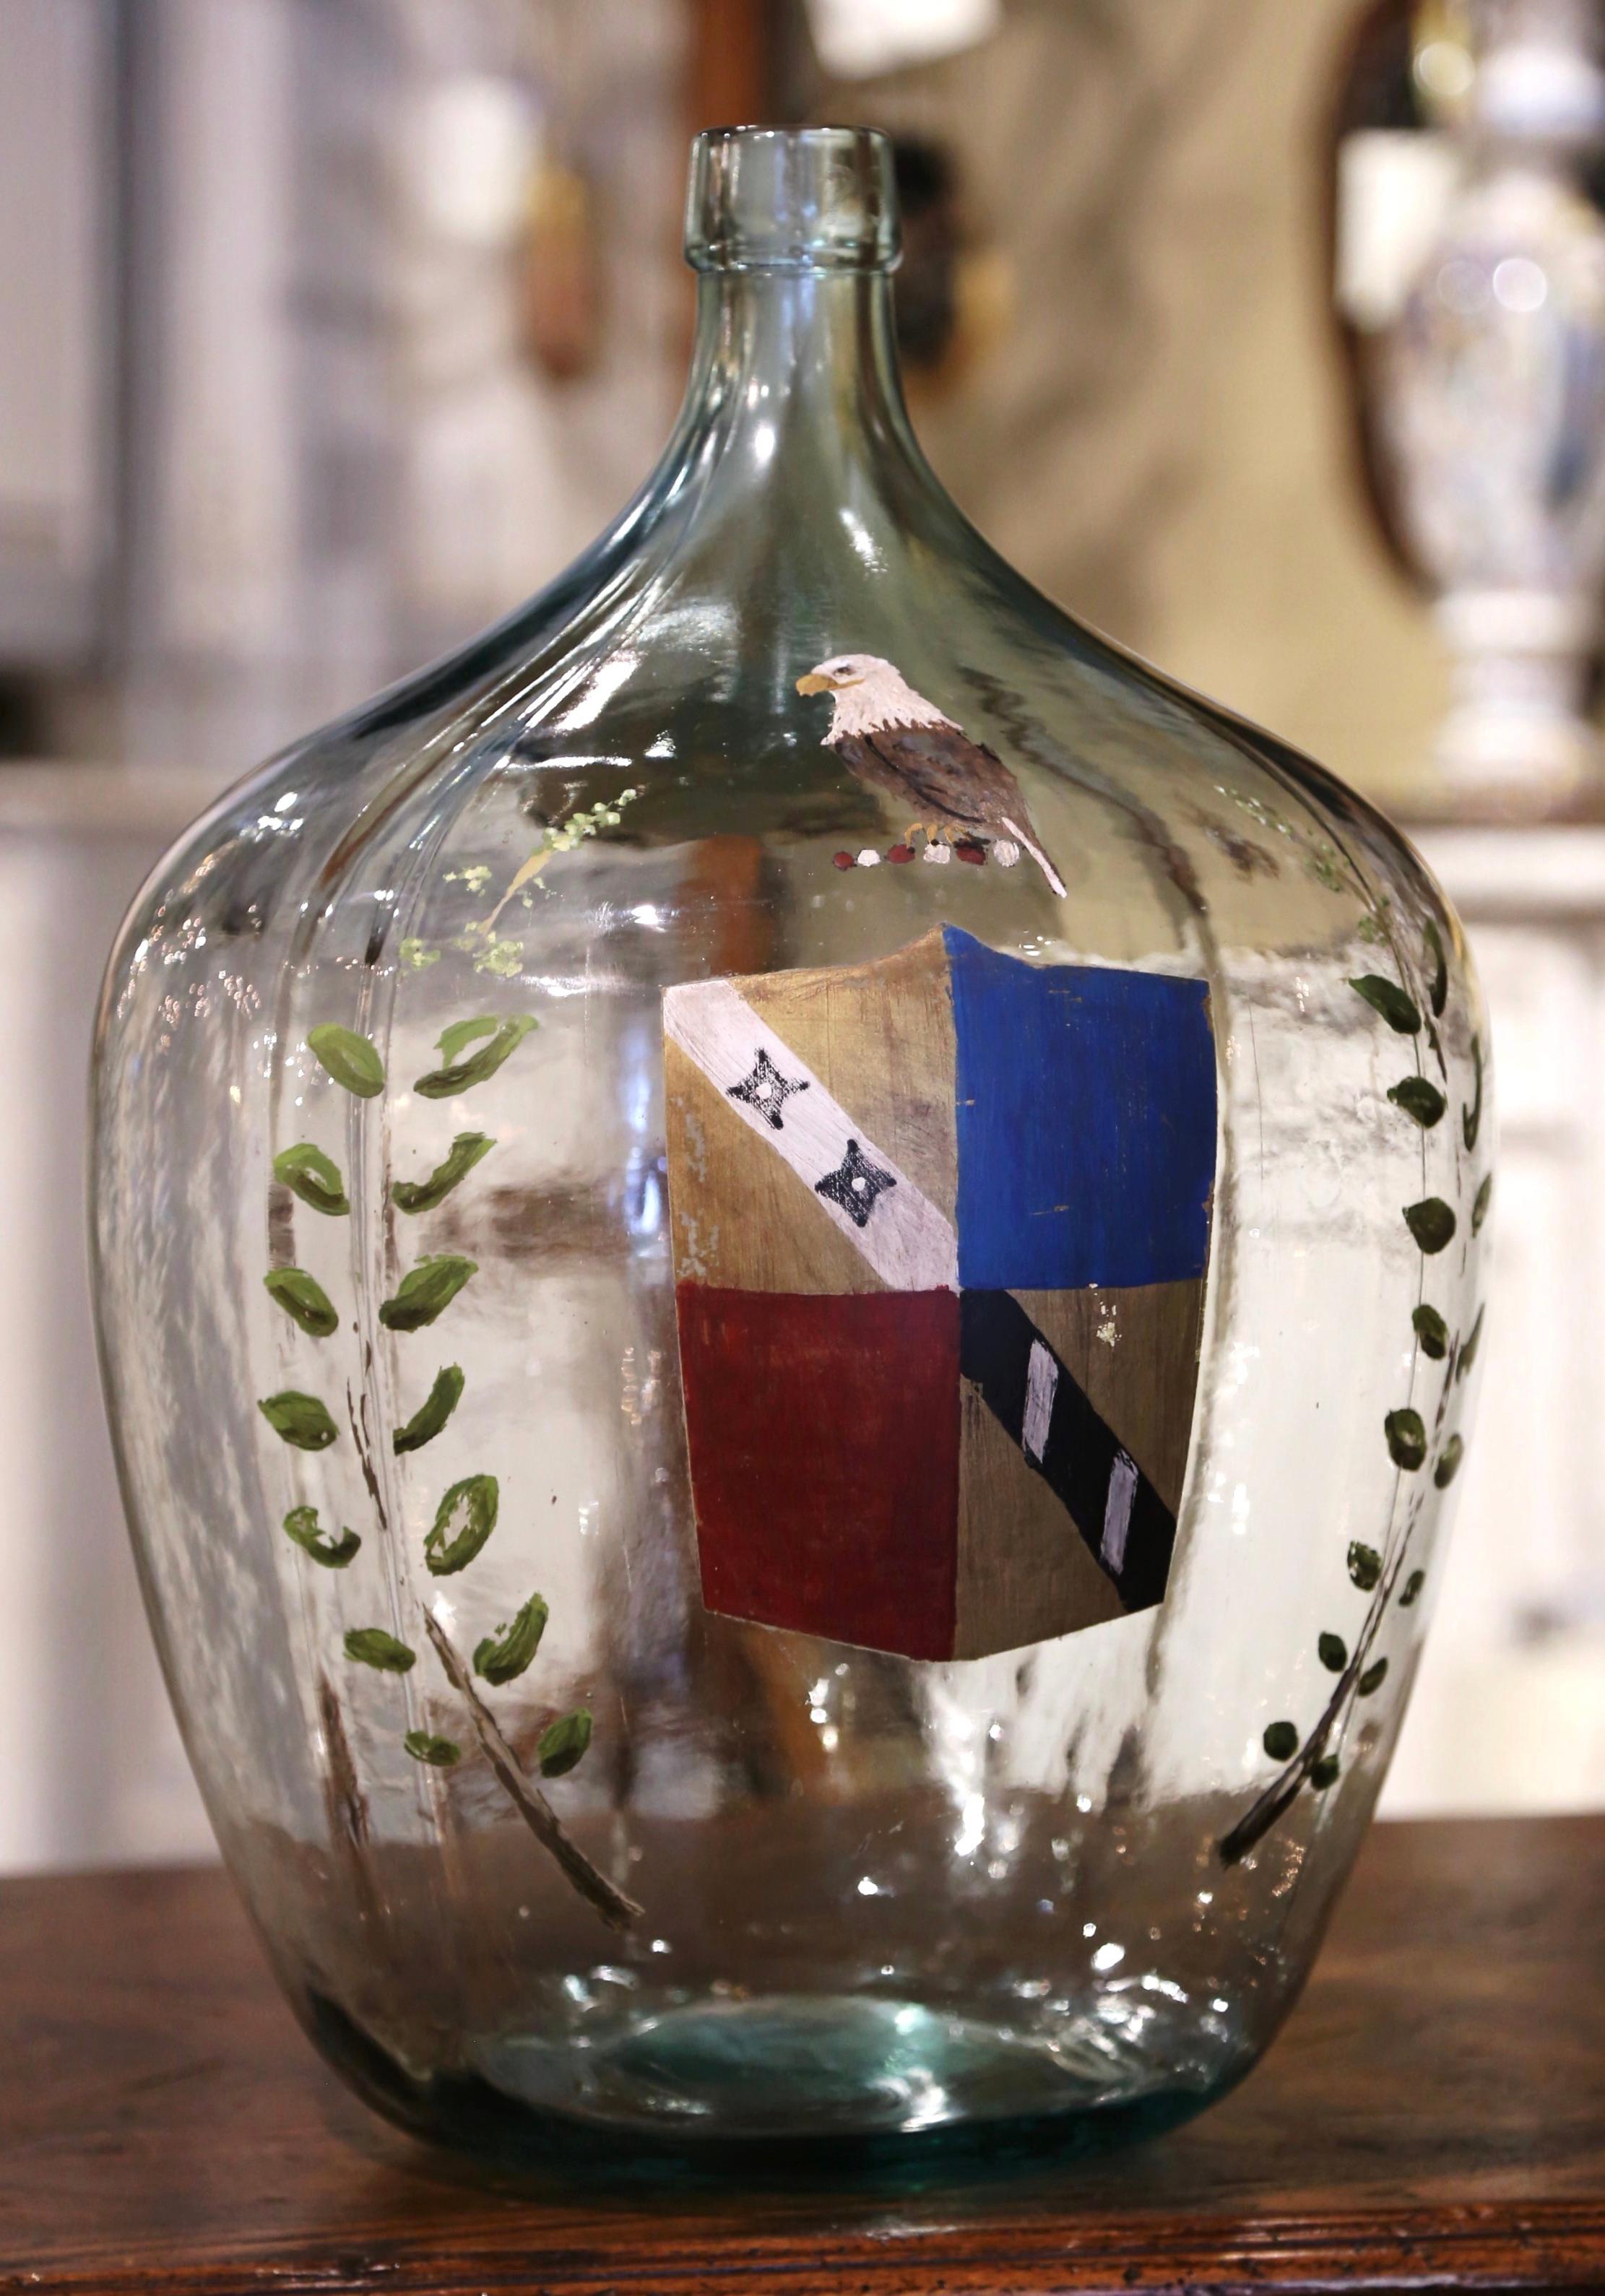 Store your wine corks in this Classic French wine bottle! Hand blown in France, this tall glass bottle features a hand painted family crest topped with a bird figure, and embellished with branches on both sides. The back is further decorated with a